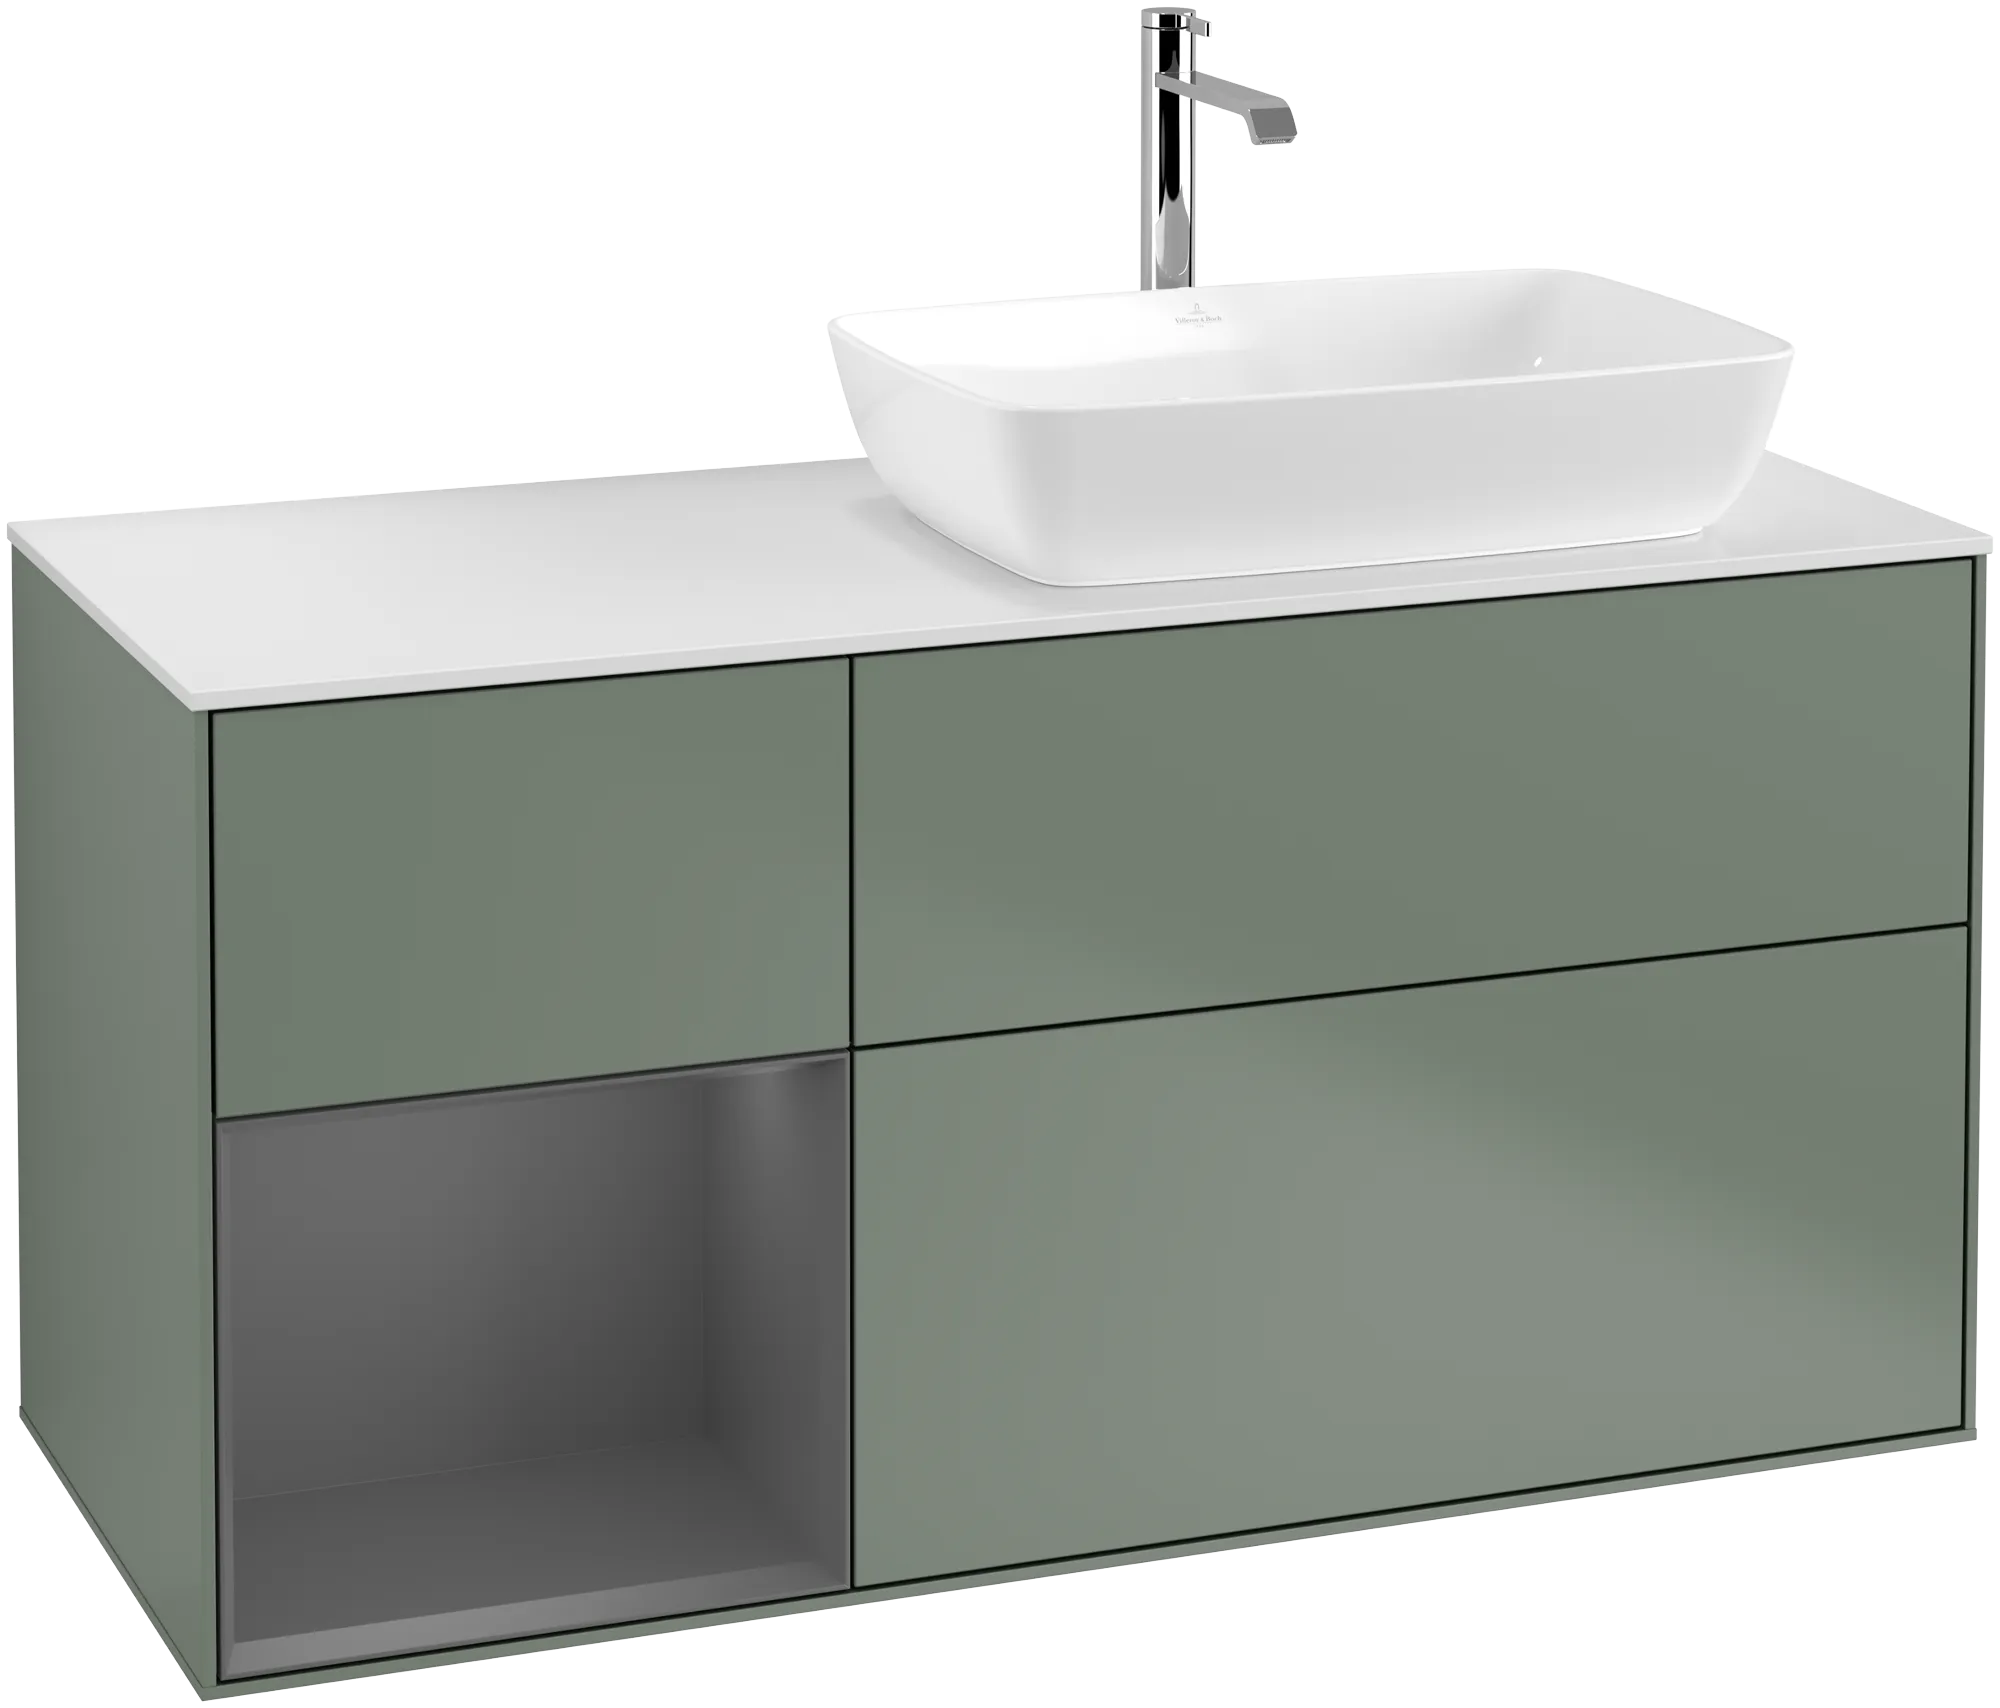 Зображення з  VILLEROY BOCH Finion Vanity unit, with lighting, 3 pull-out compartments, 1200 x 603 x 501 mm, Olive Matt Lacquer / Anthracite Matt Lacquer / Glass White Matt #G801GKGM